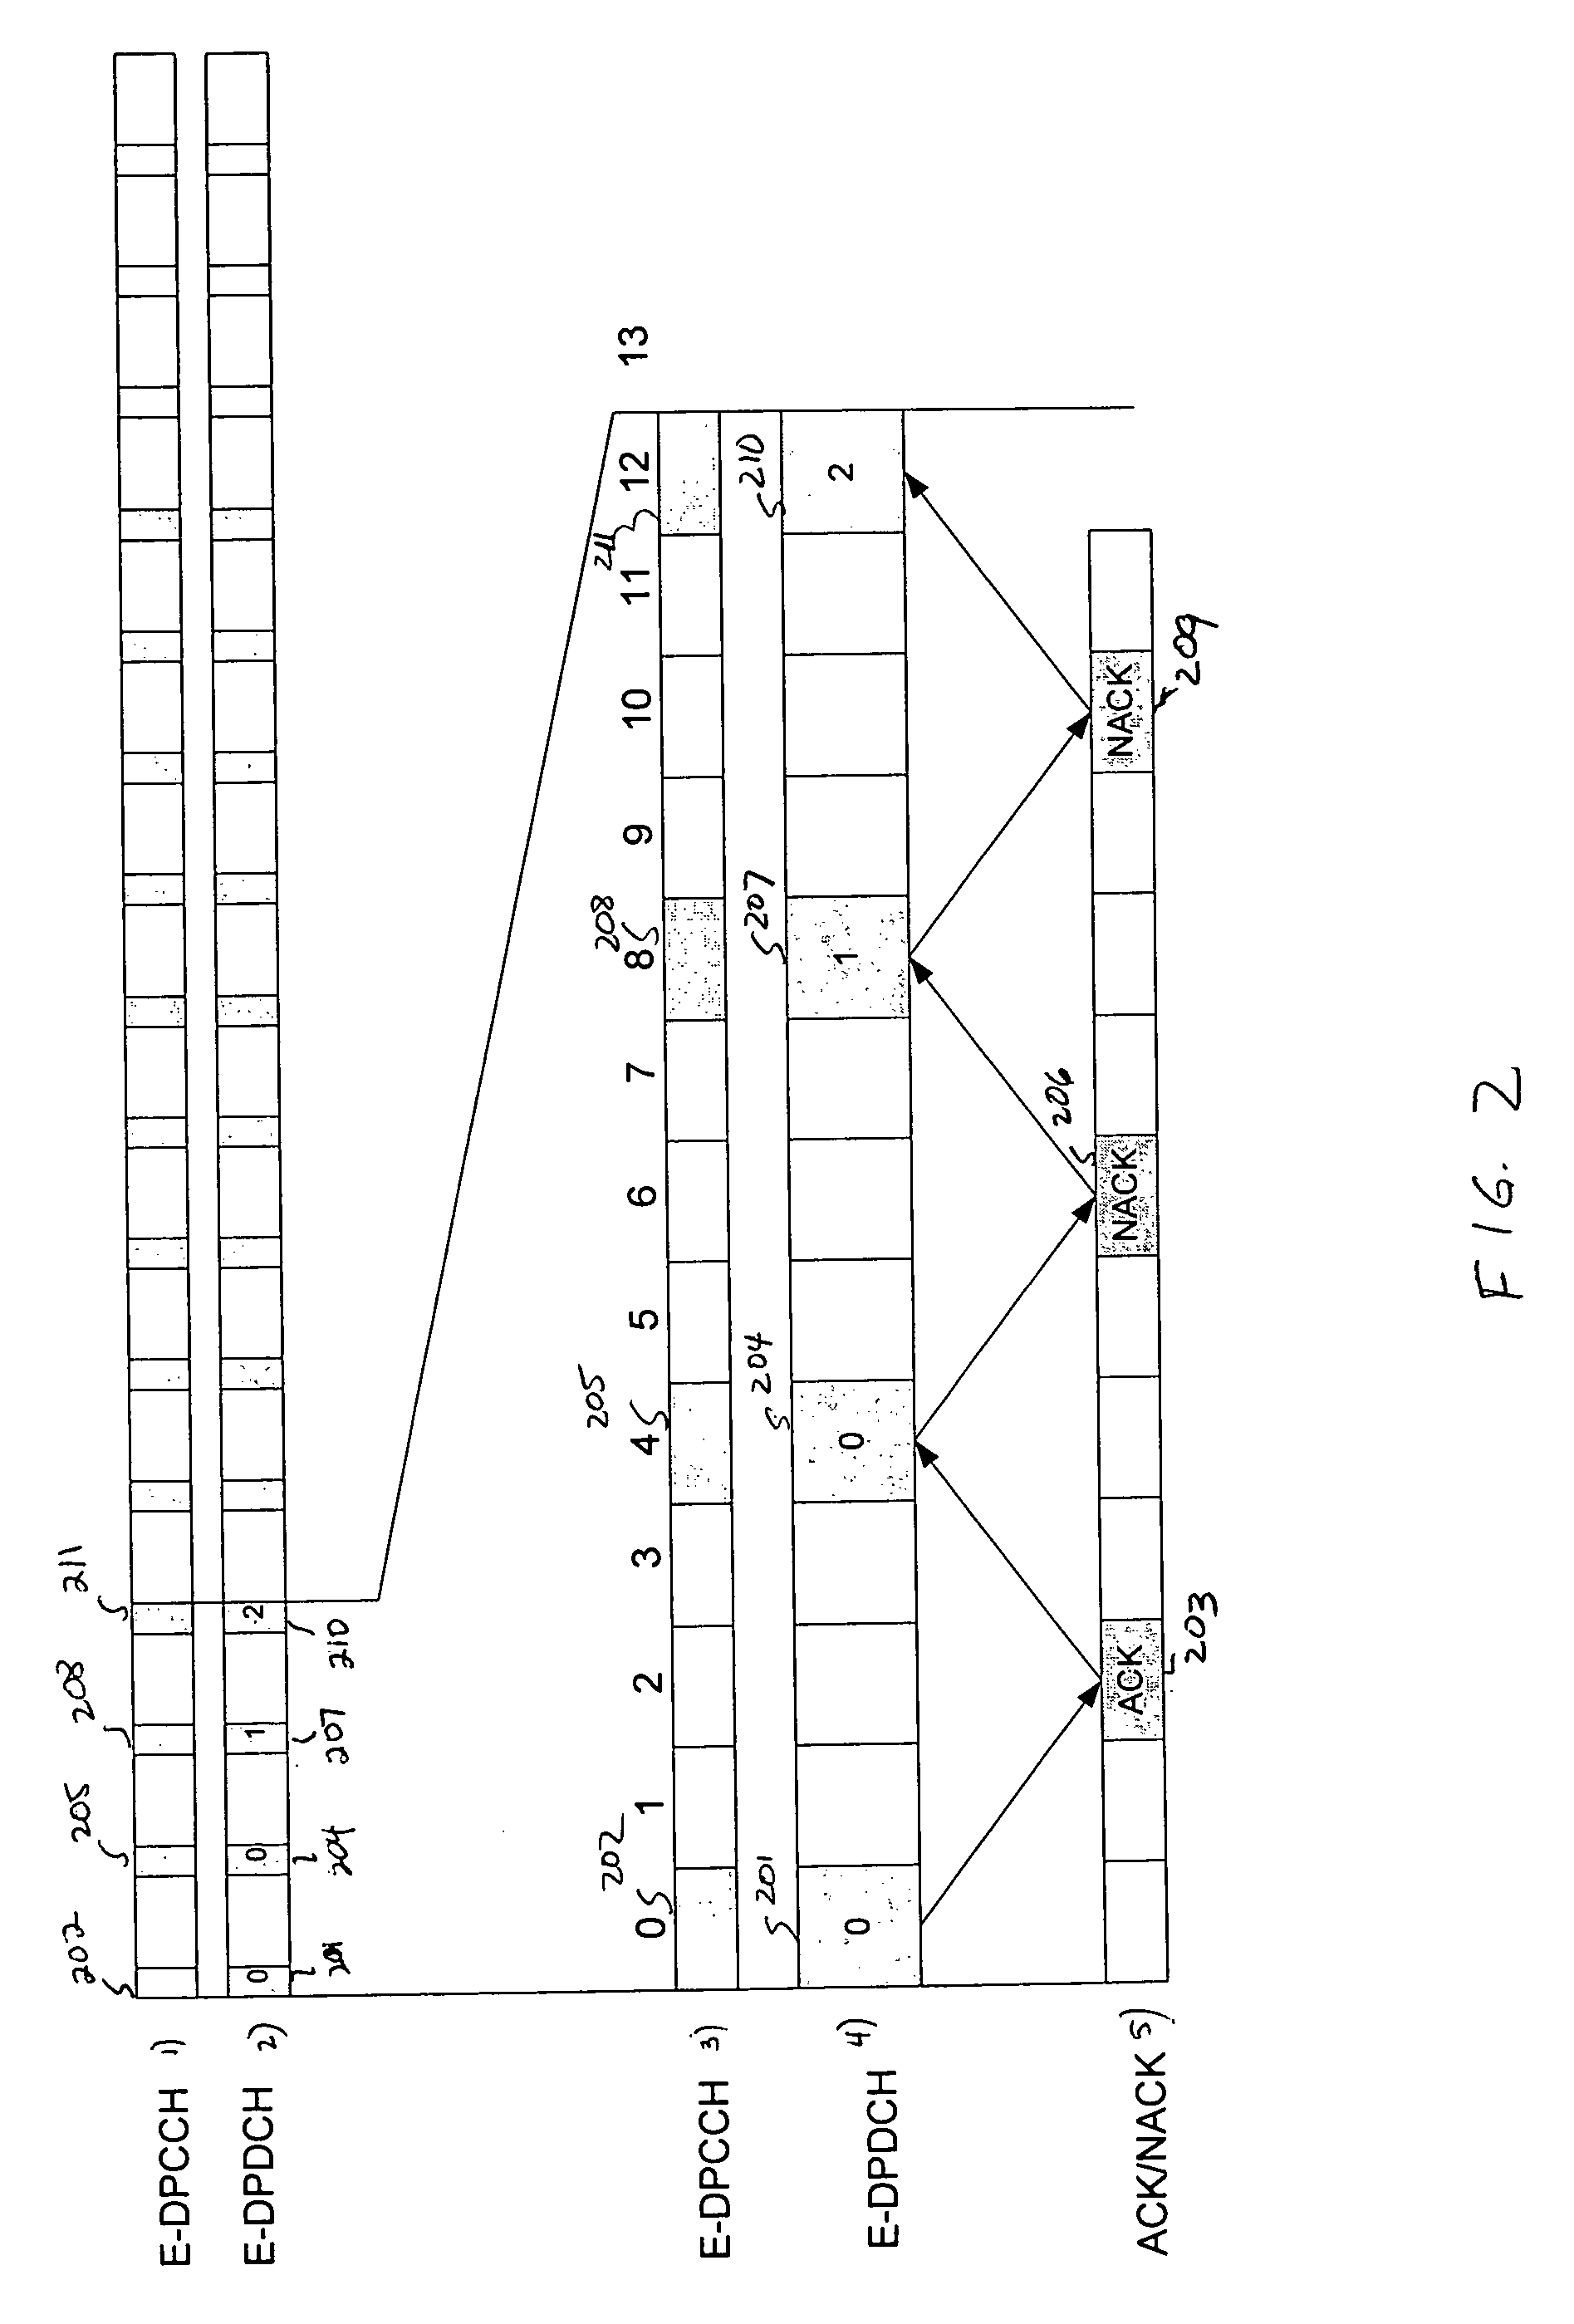 Method of increasing the capacity of enhanced data channel on uplink in a wireless communications system